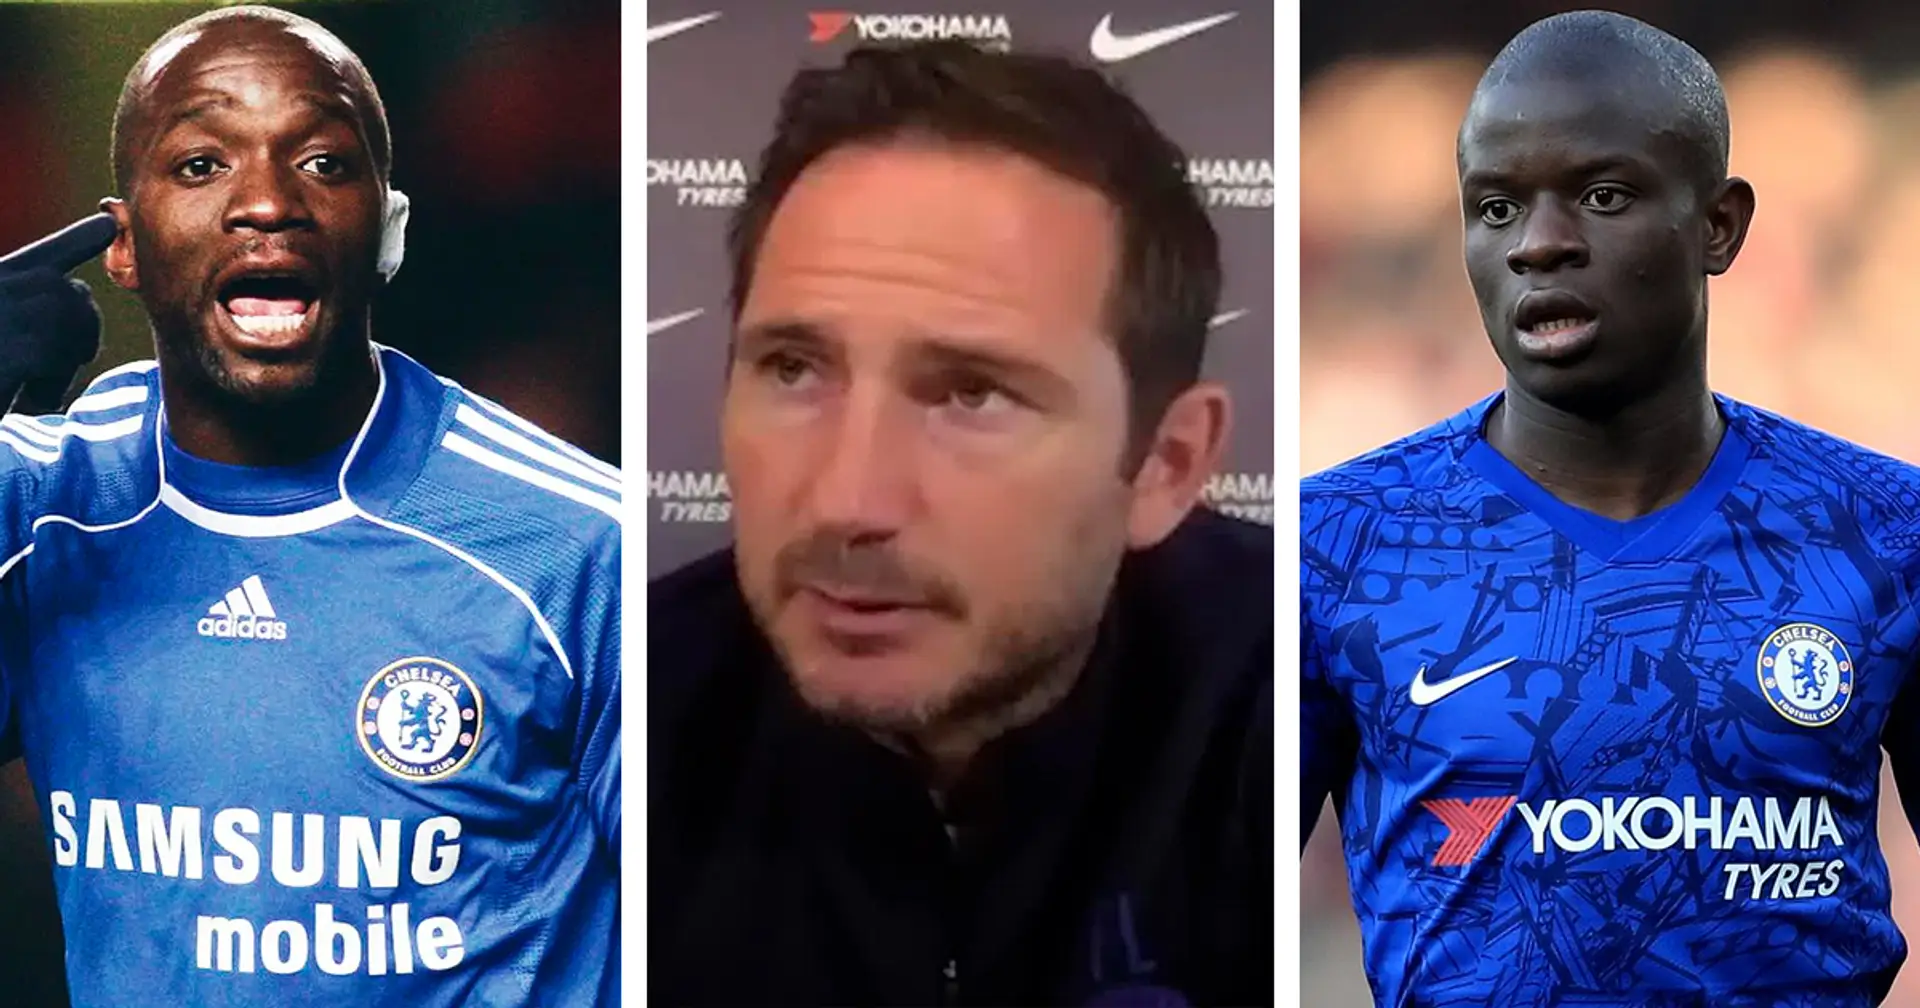 Frank Lampard compares N'Golo Kante's game to defensive midfield revolutionary Claude Makelele's role